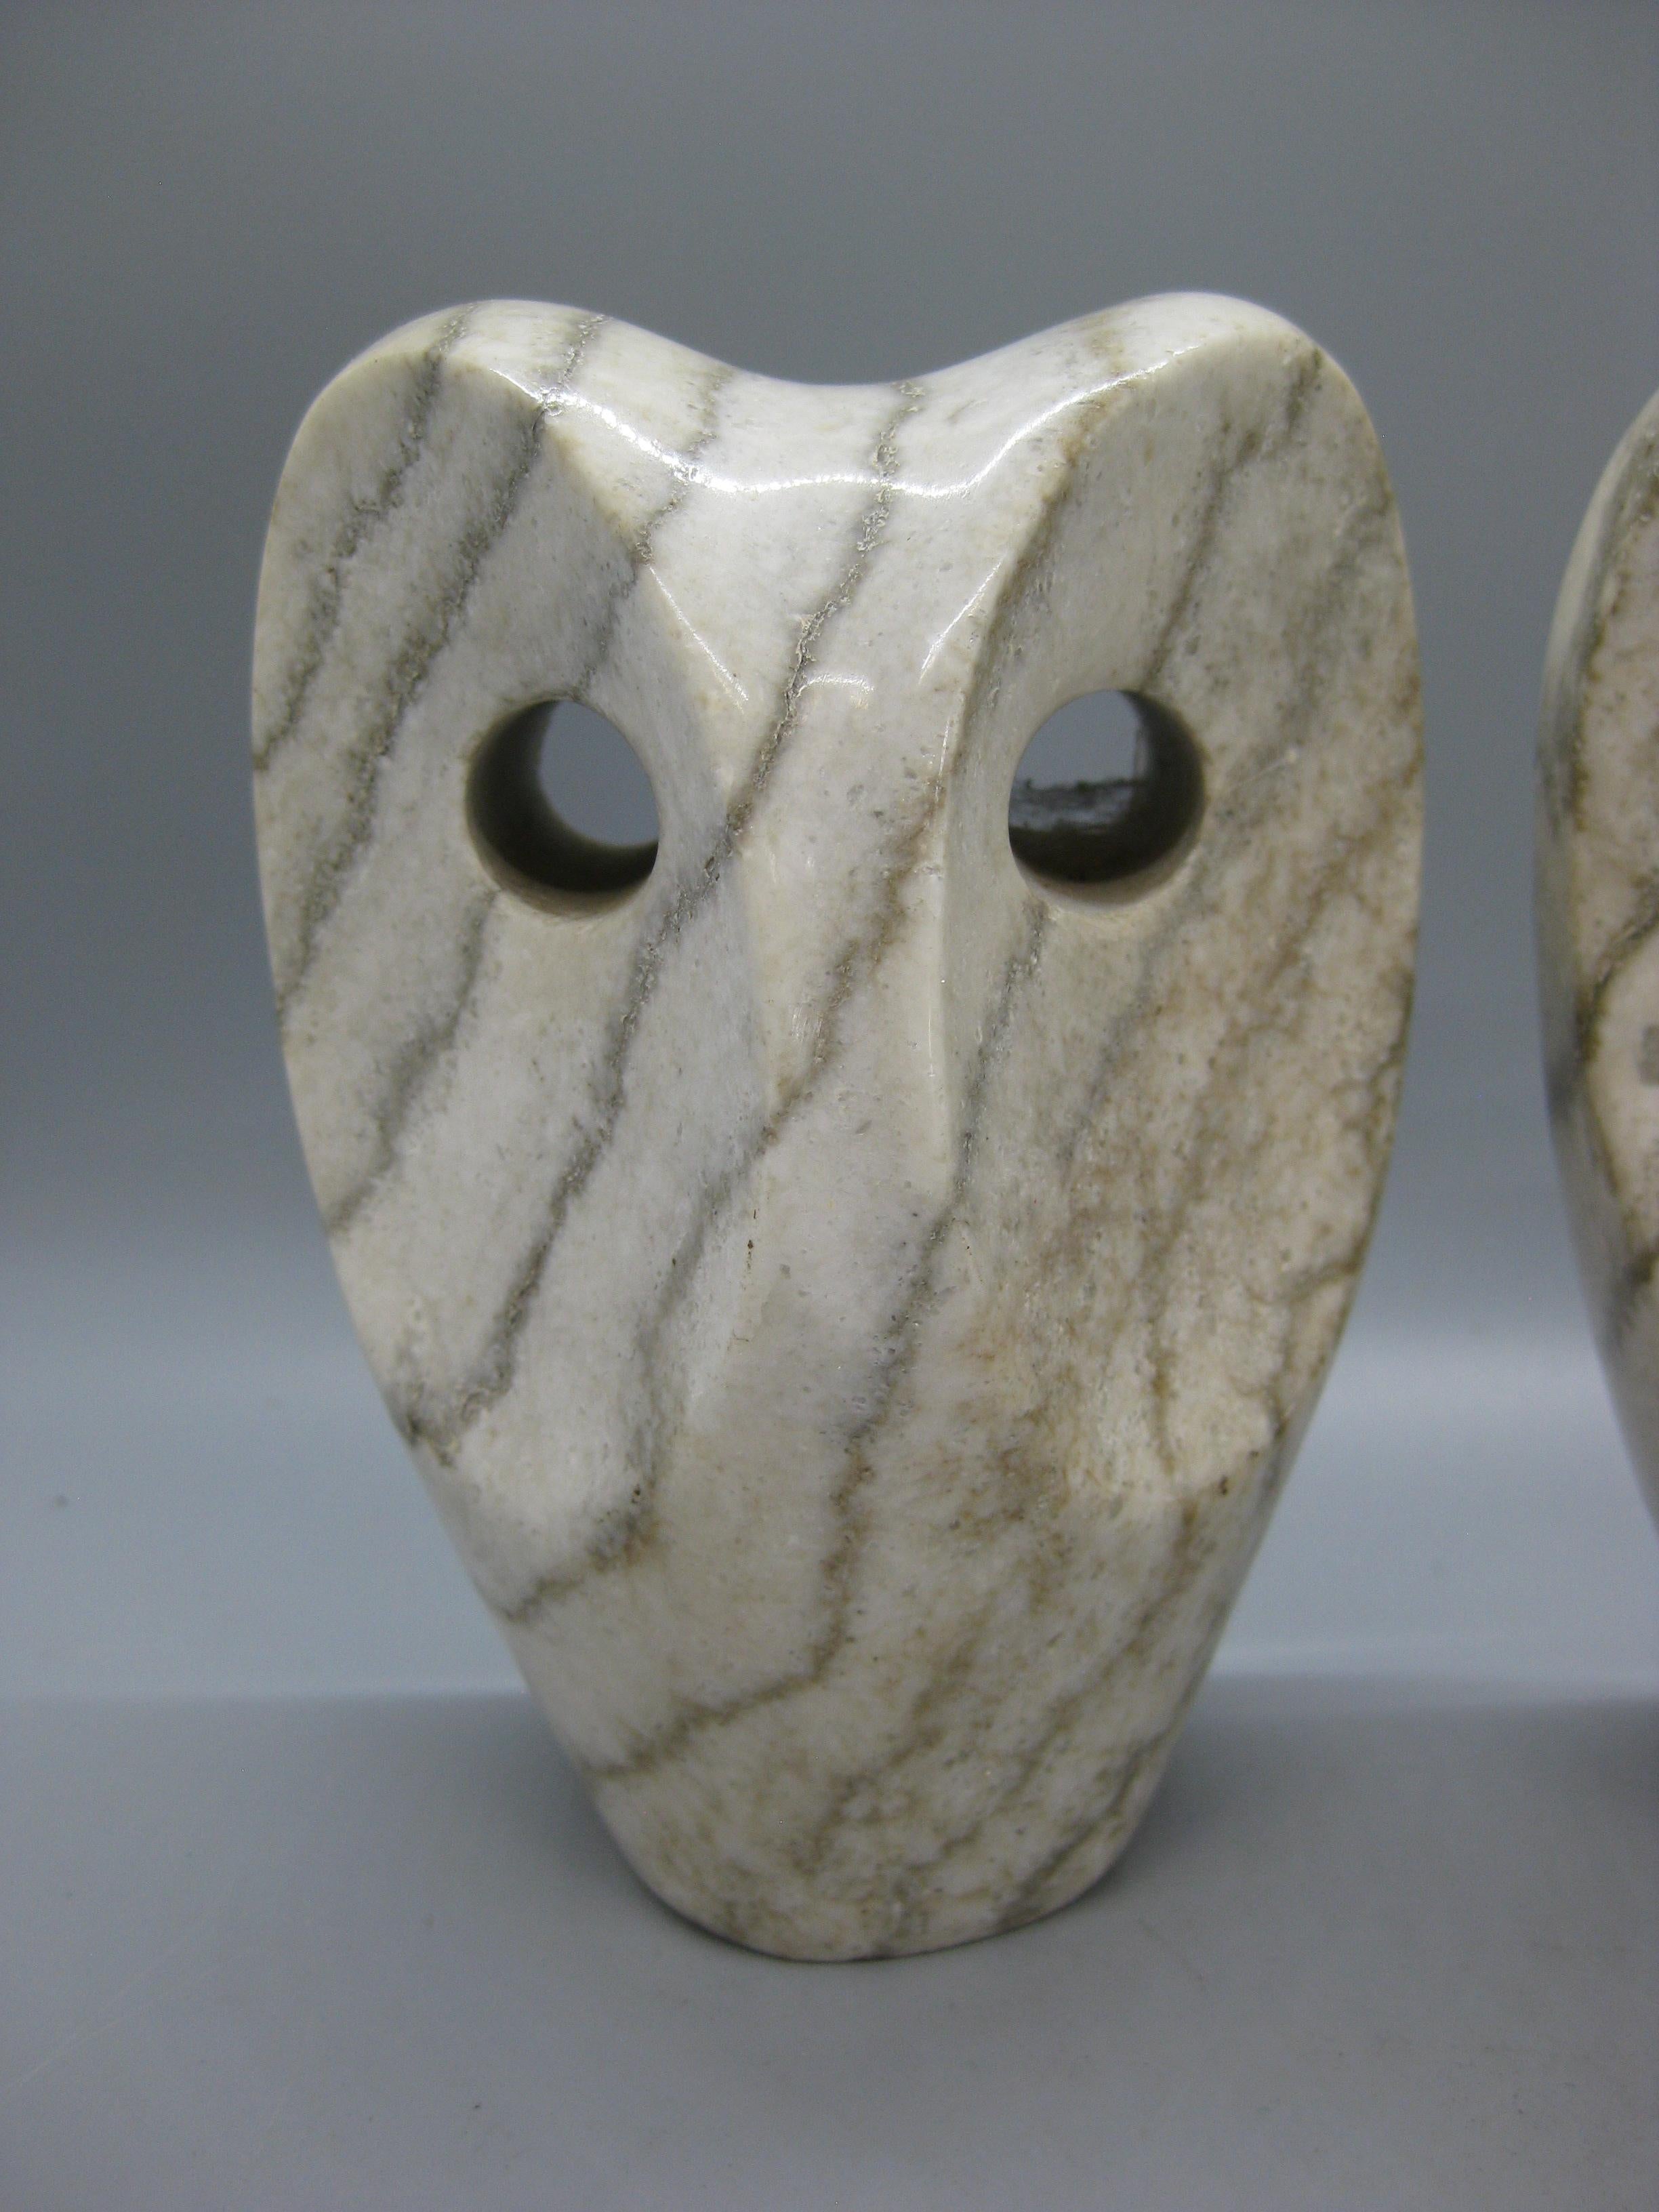 We are offering a wonderful pair of matching Modernist abstract Italian hand carved alabaster Owl figural bookends sculptures. These date from the 1960's. Made of solid alabaster. There are no marks or signatures. Wonderful form and design. Color is